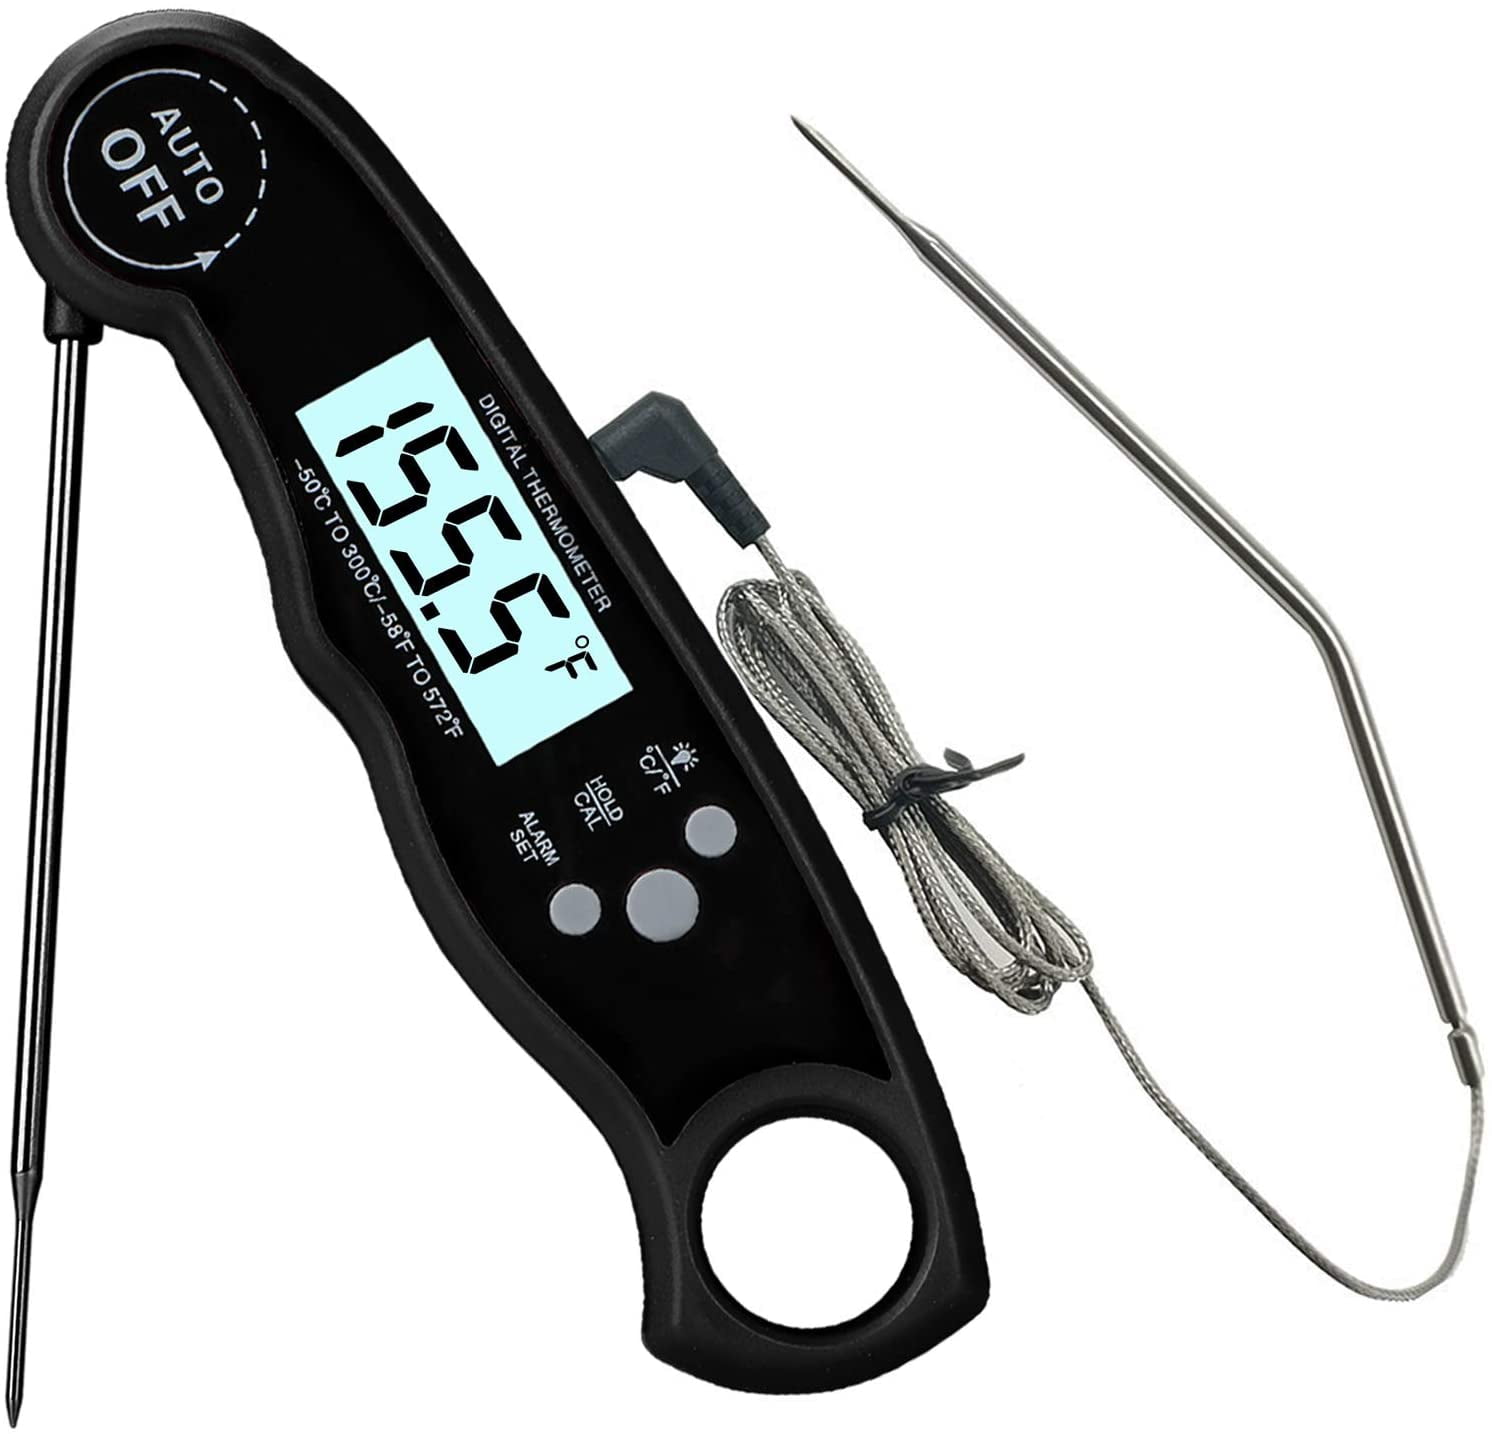 Oven-Safe Digital Meat Thermometer Instant Read For Cooking BBQ Grilling Grill